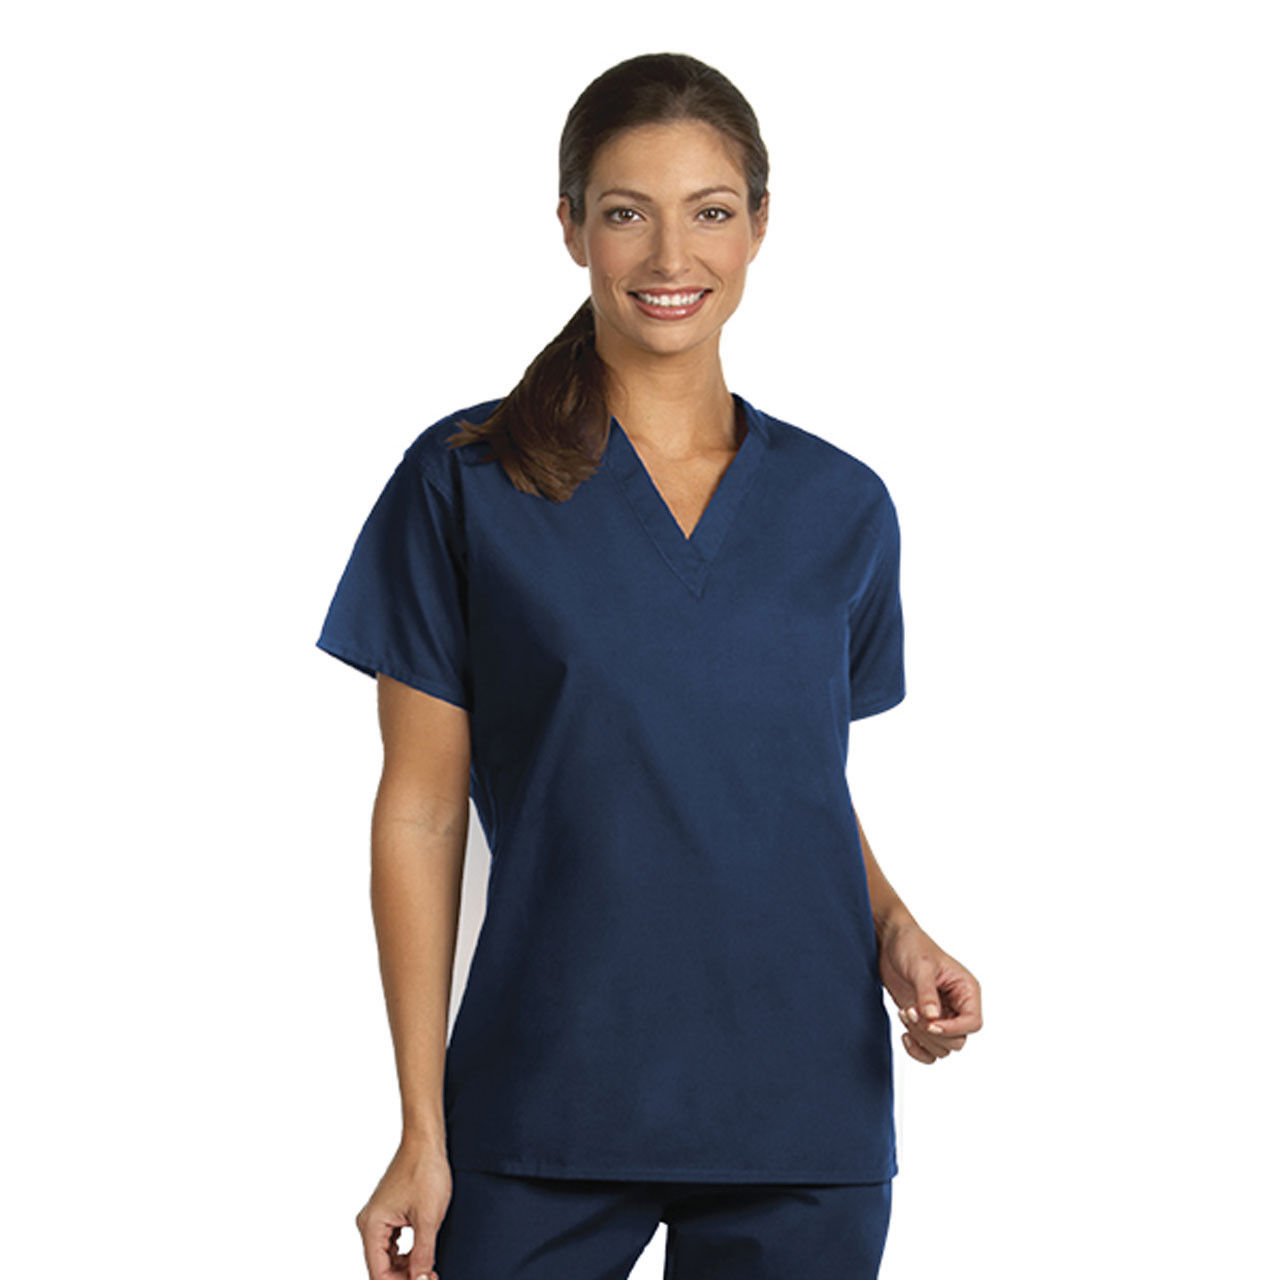 Is the cheap scrubs set in navy blue reversible v-neck durable?